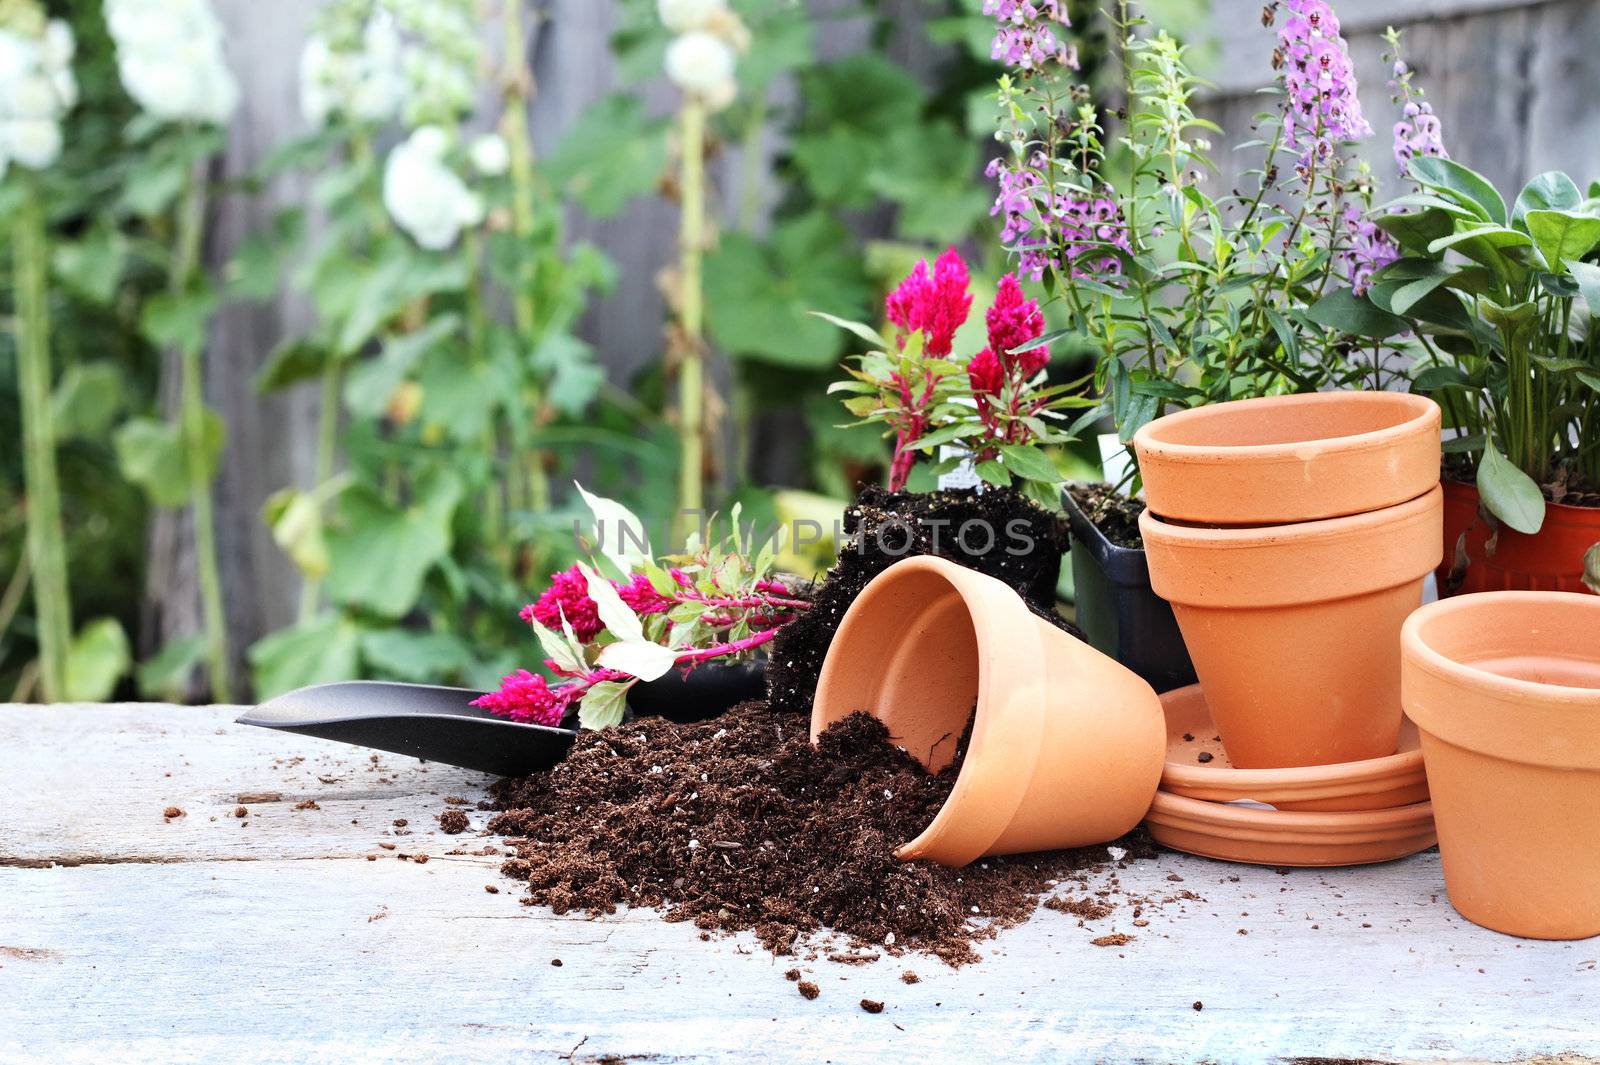 Rustic table with flower pots, potting soil, trowel and plants in front of an old weathered gardening shed.